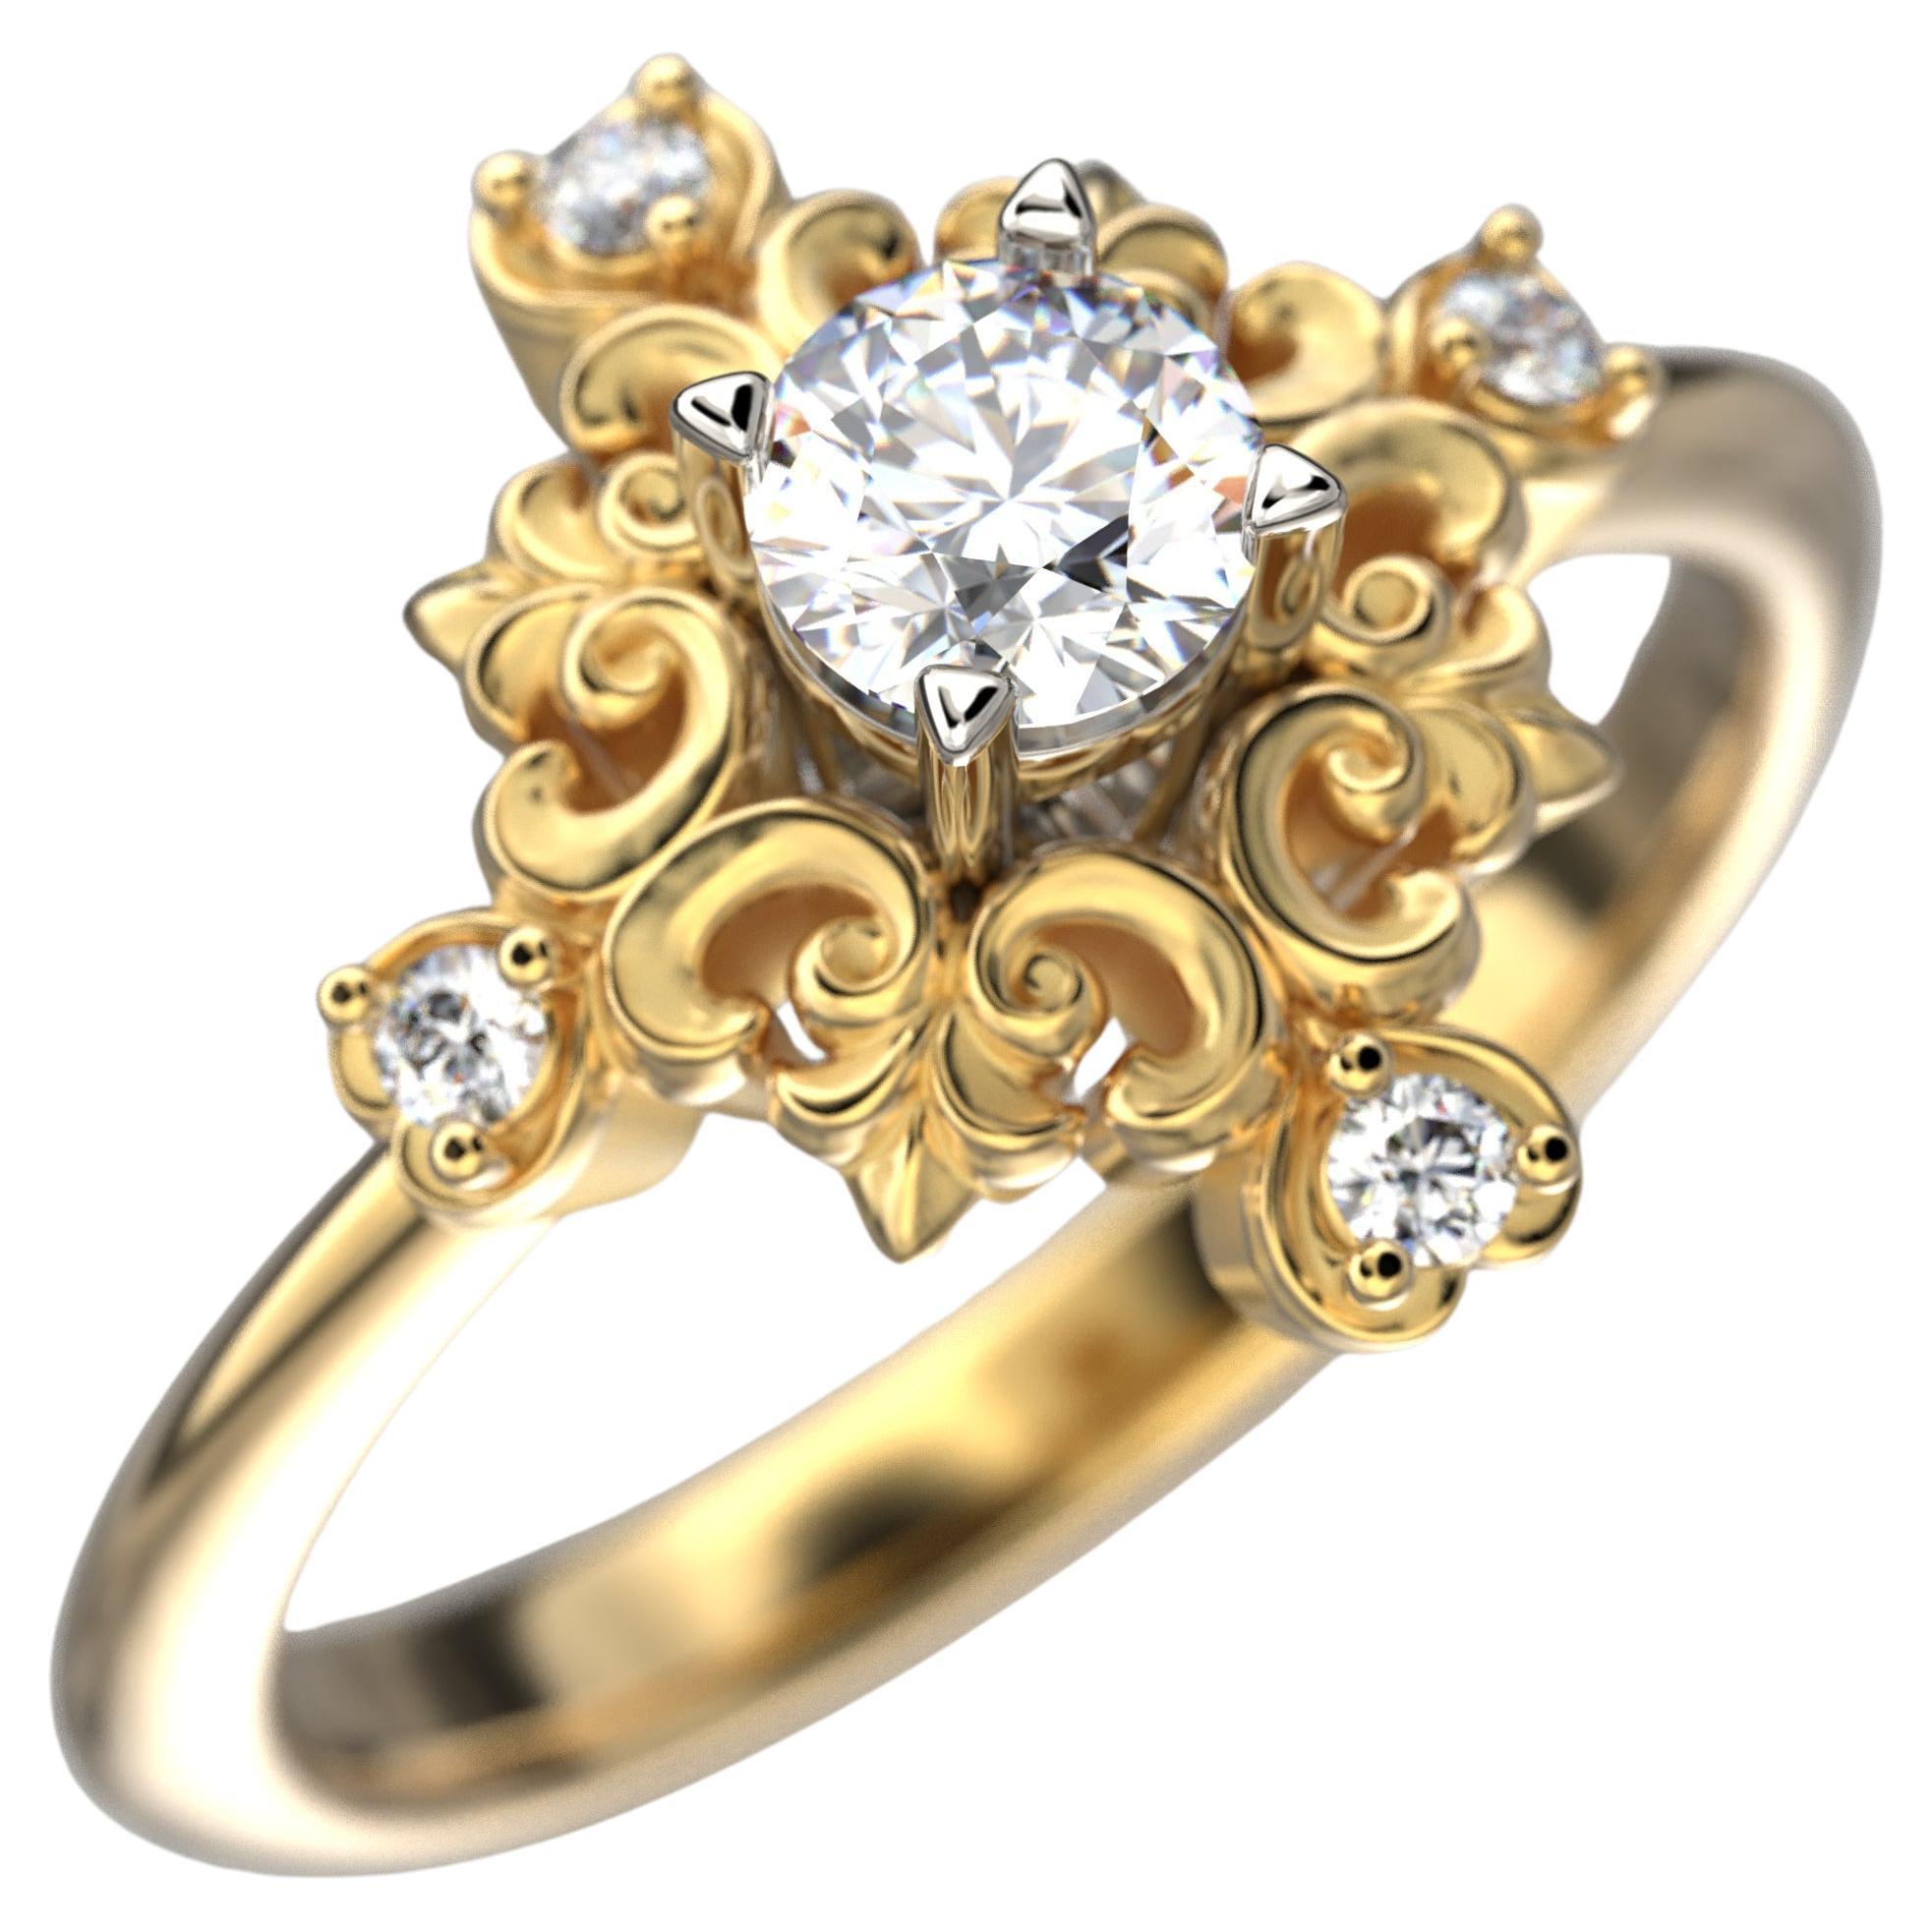 18k Gold Italian Diamond Engagement Ring in Baroque Style by Oltremare Gioielli